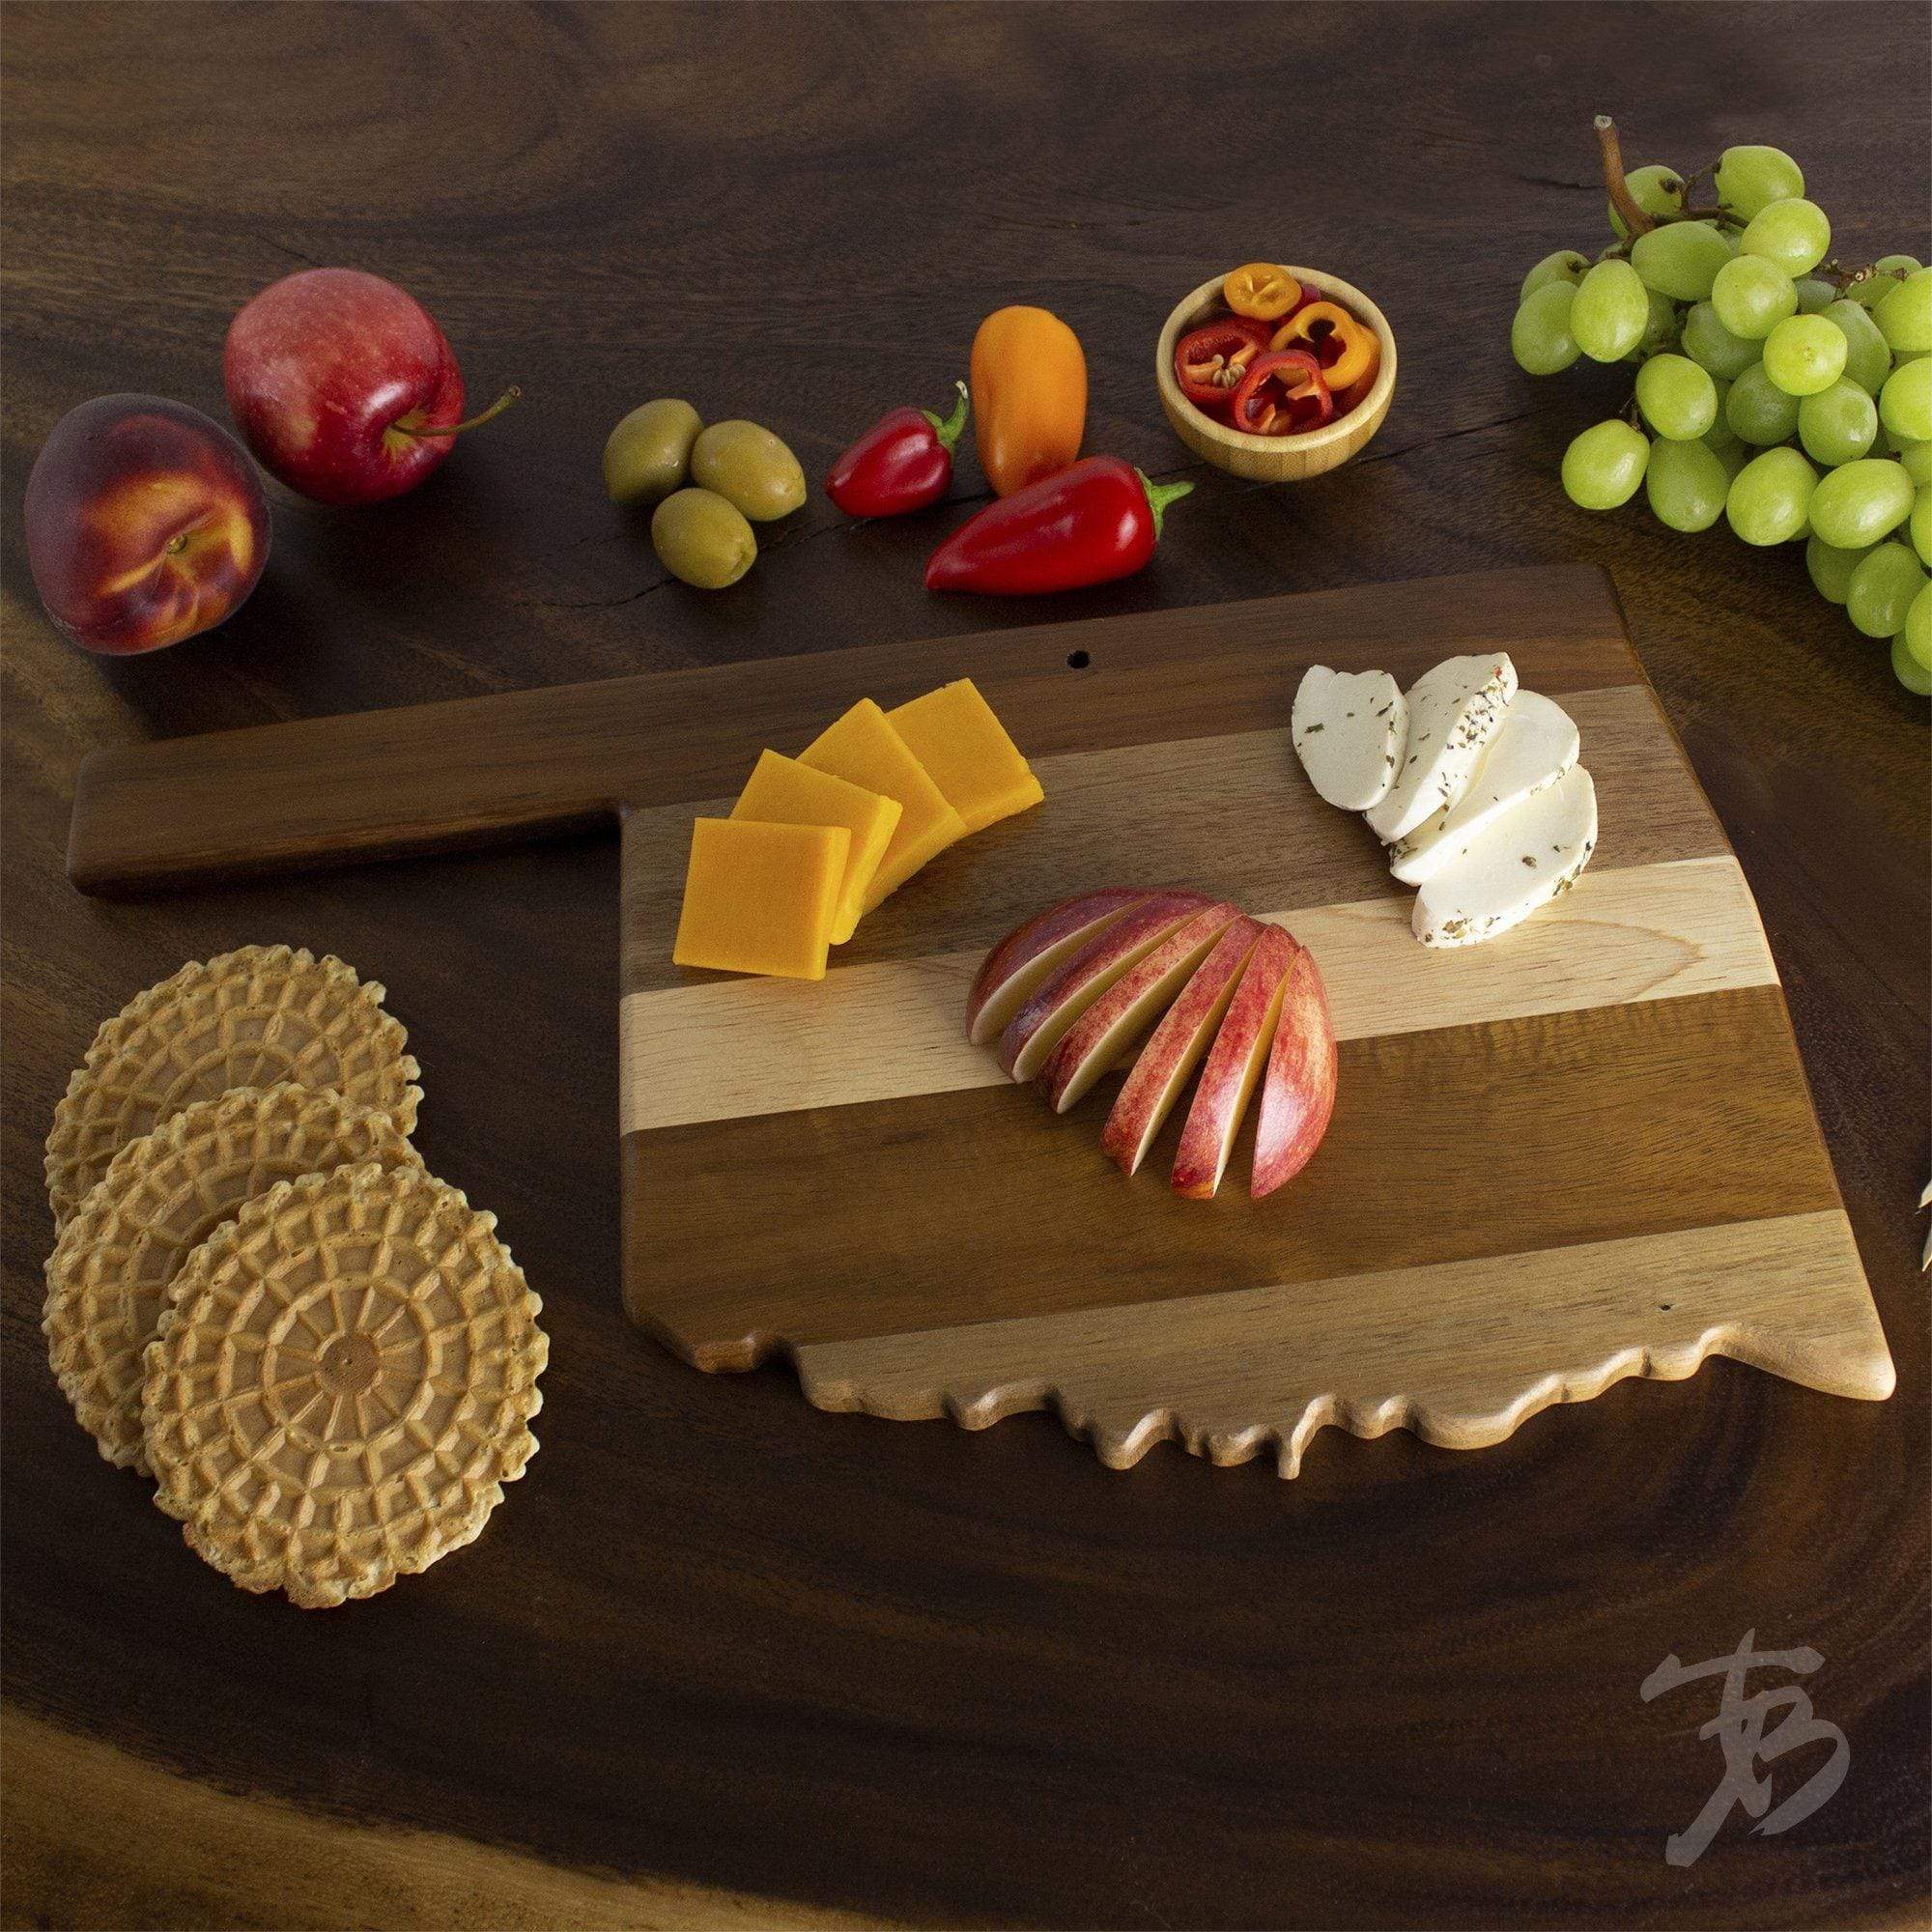 https://totallybamboo.com/cdn/shop/products/rock-branchr-shiplap-series-oklahoma-state-shaped-wood-serving-and-cutting-board-totally-bamboo-504653.jpg?v=1627834321